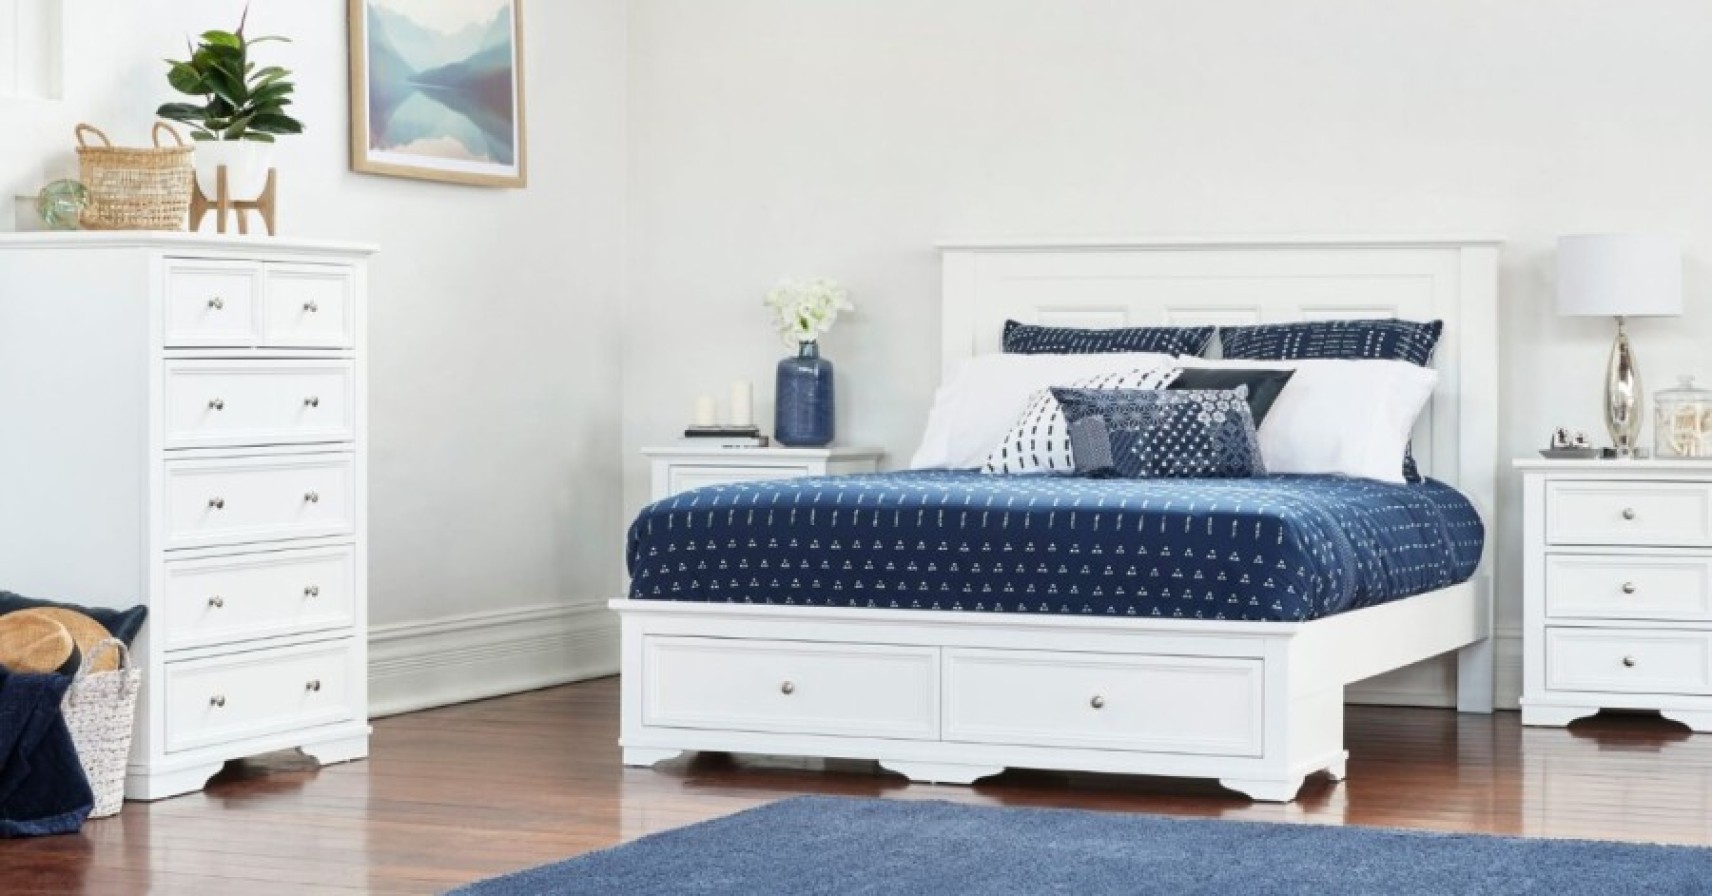 A wide variety of bedroom furniture including beds, dressers and bedside tables